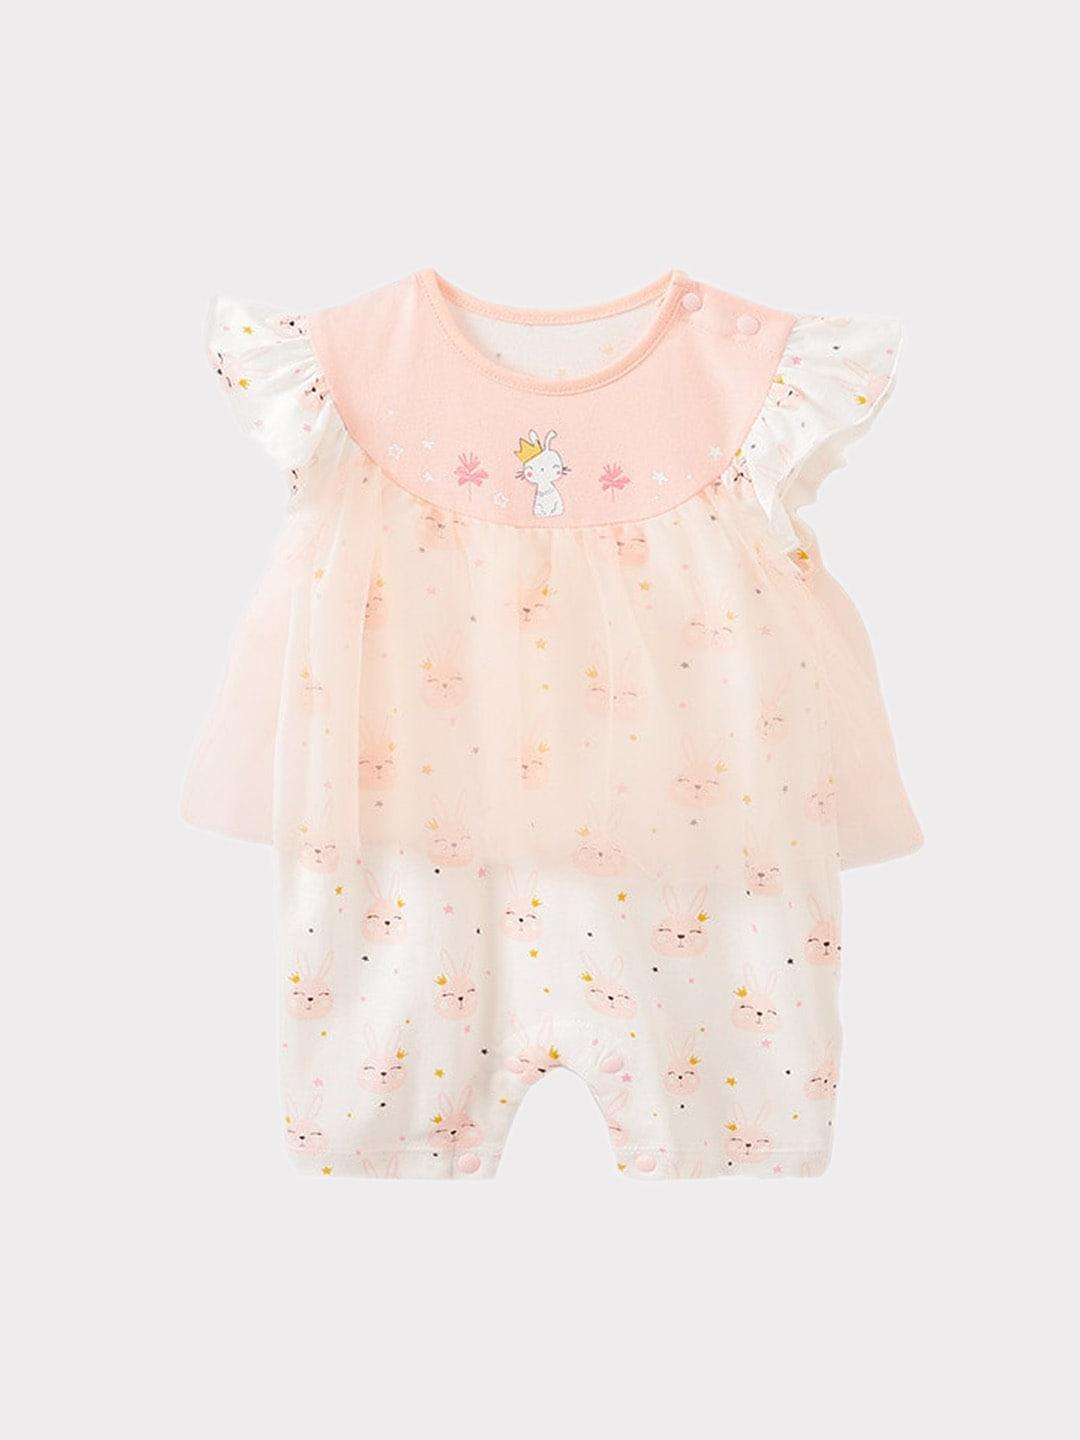 stylecast-infant-girls-peach-conversatinal-printed-cotton-rompers